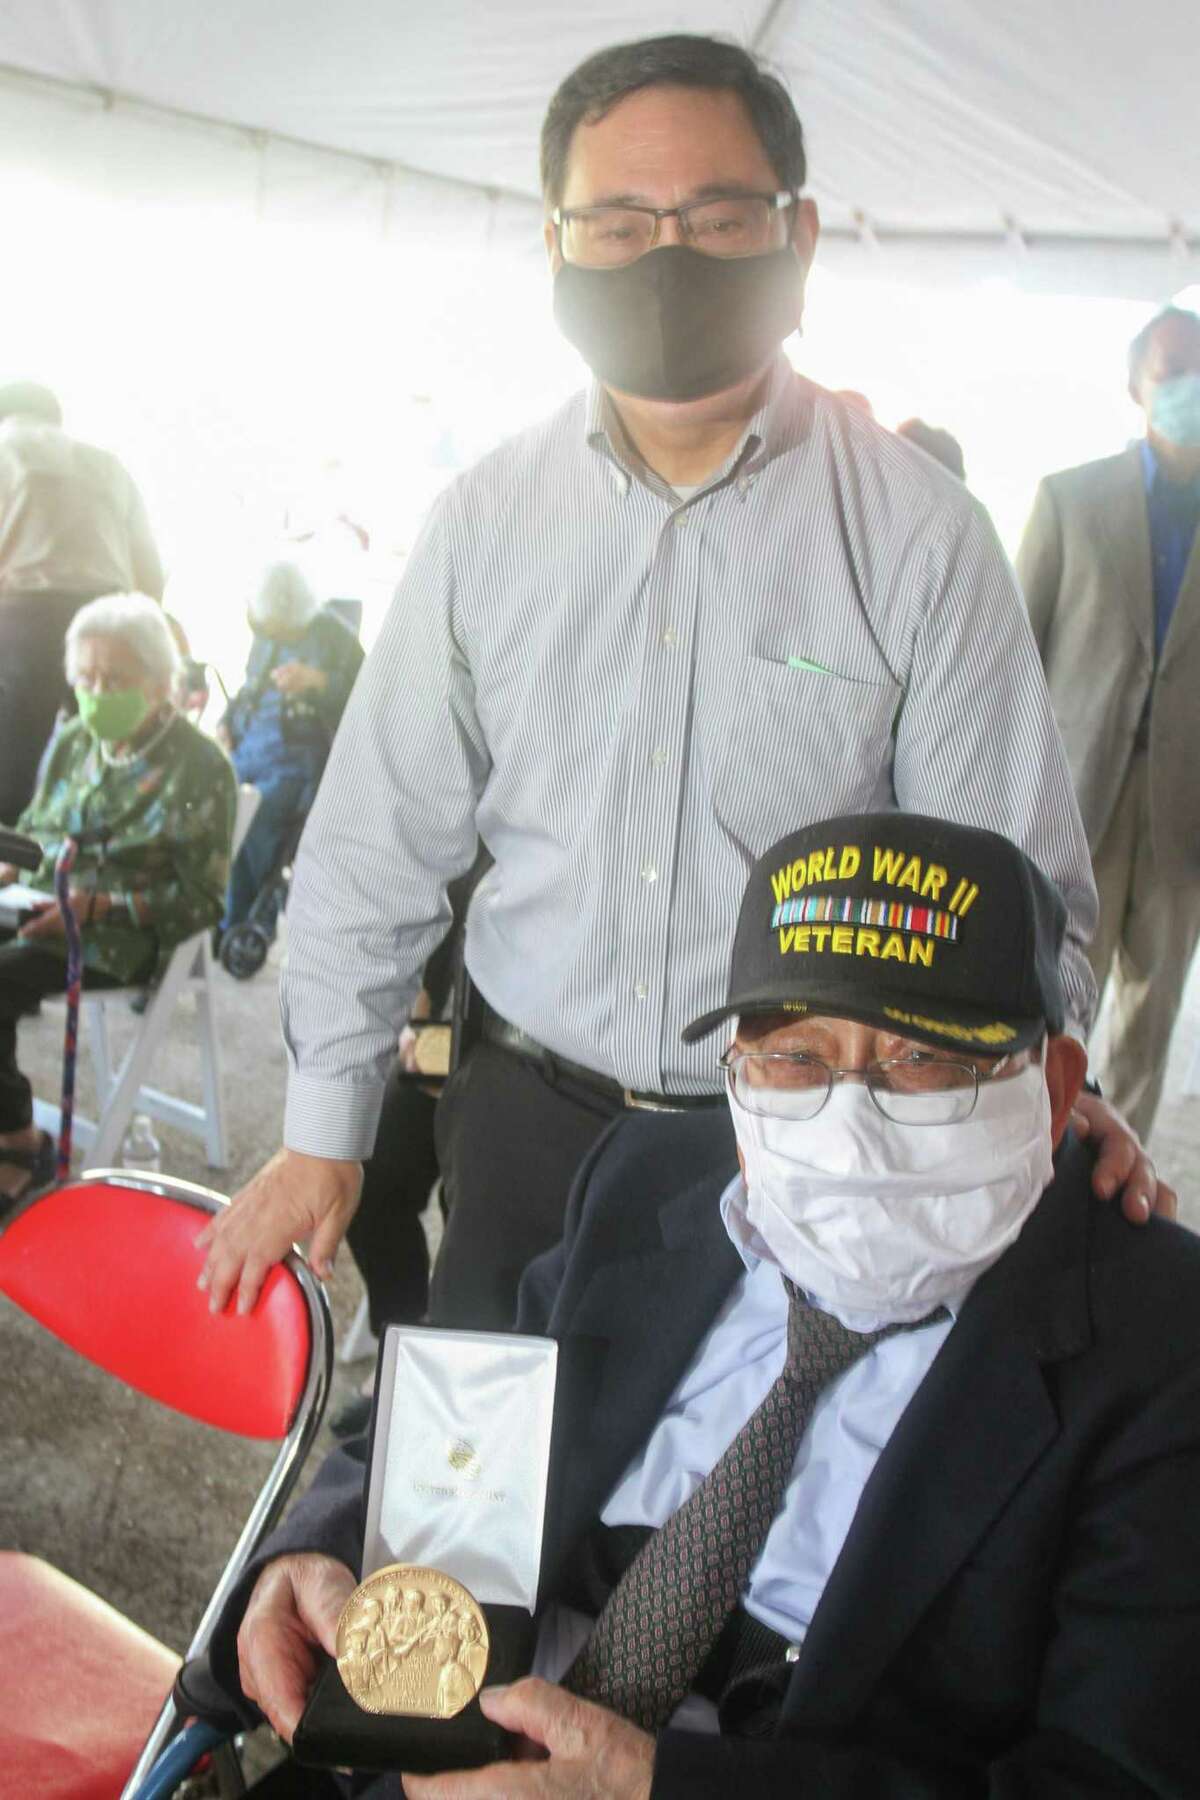 Andrew Yee, left, with his father, Paul Yee, who is holding his medal as the Chinese American Citizens Alliance (C.A.C.A.) Southern Region Congressional Gold Medal Committee hosted the Congressional Gold Medal Ceremony for four living Chinese American WWII veterans, surviving widows, and other next of kin of the service members.